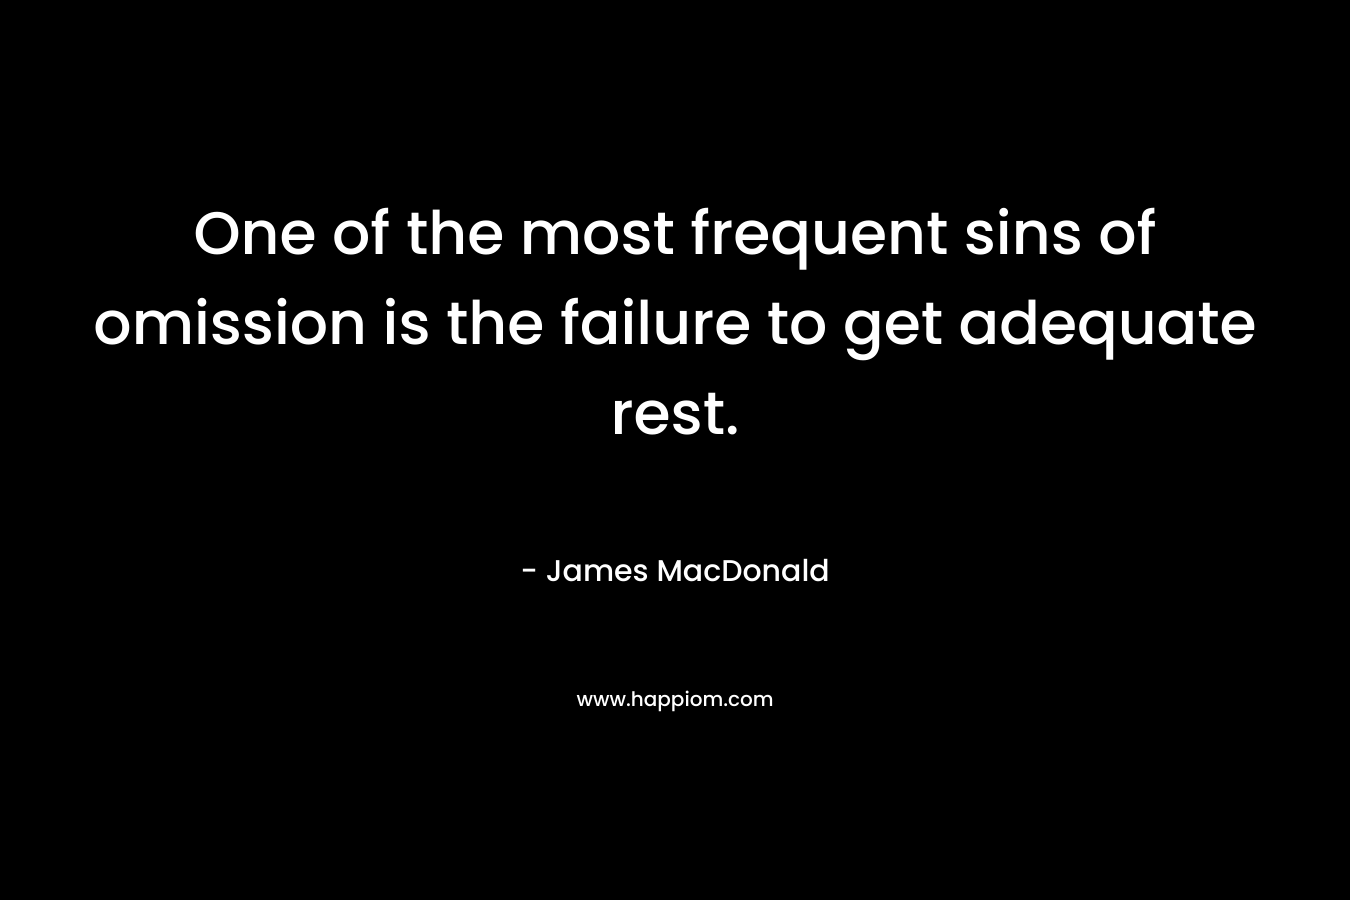 One of the most frequent sins of omission is the failure to get adequate rest.